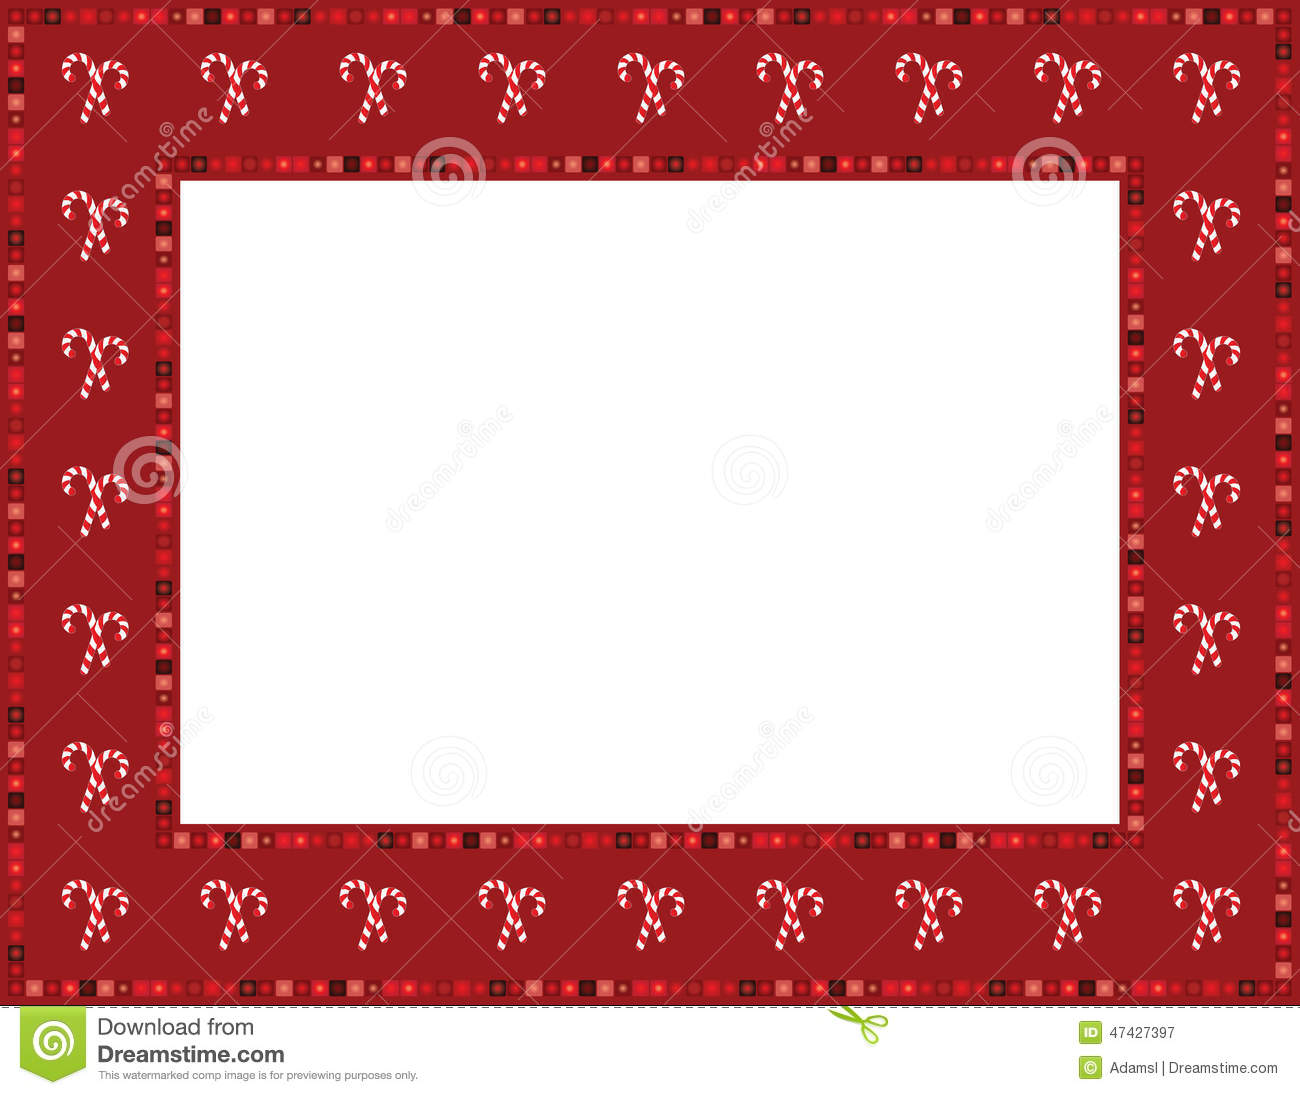 Candy Cane Christmas Borders and Frames